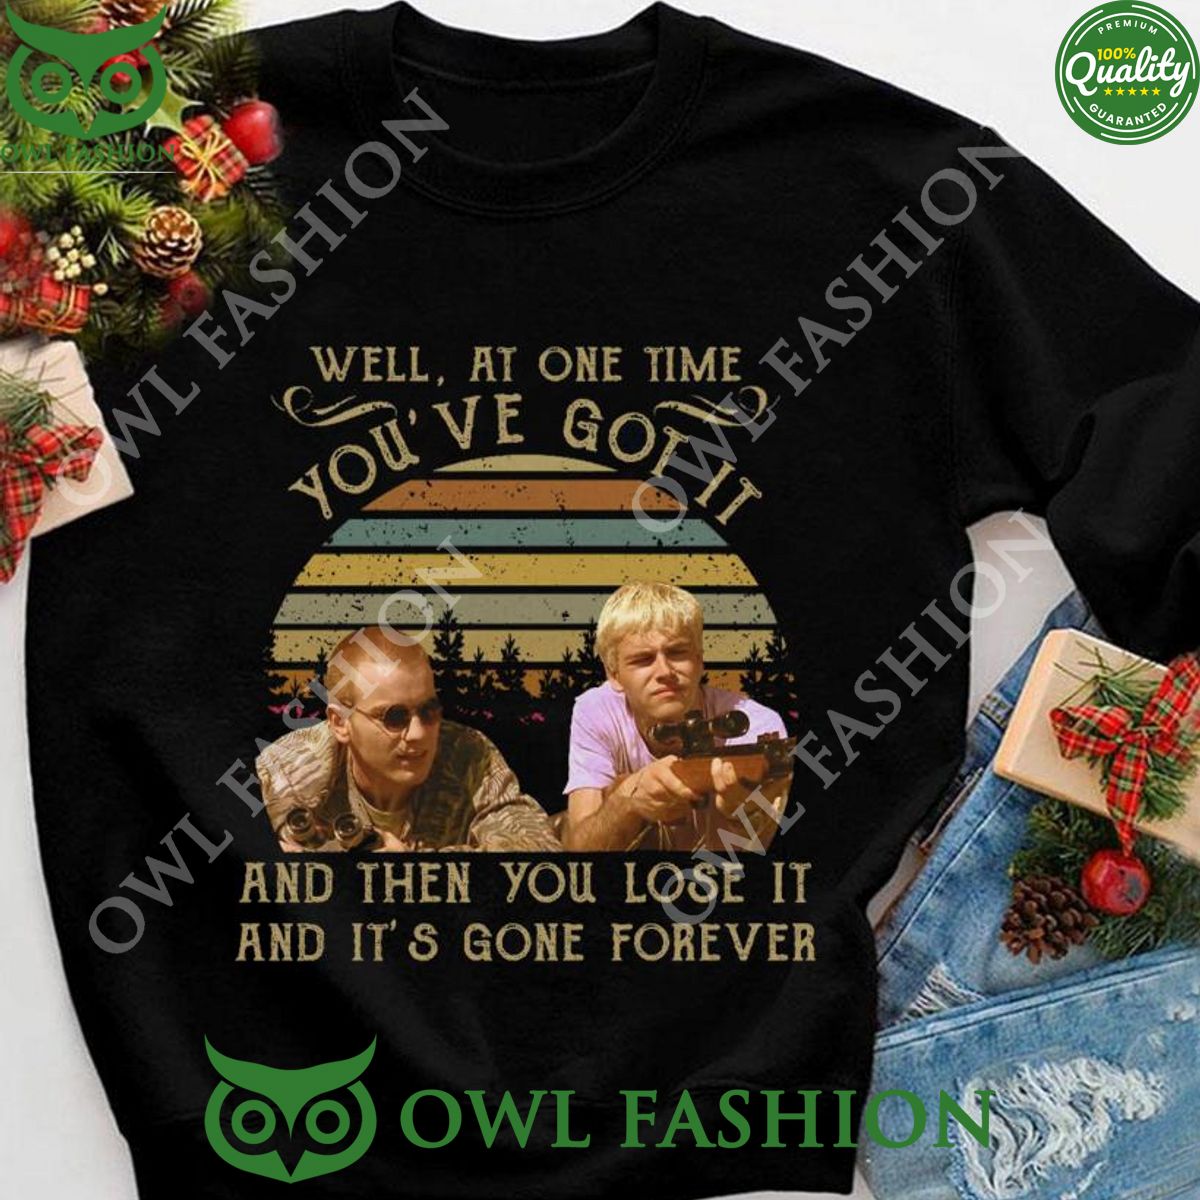 fix sick boy trainspotting at one time you got it lose it gove forever vintage movie t shirt 4 IEryM.jpg